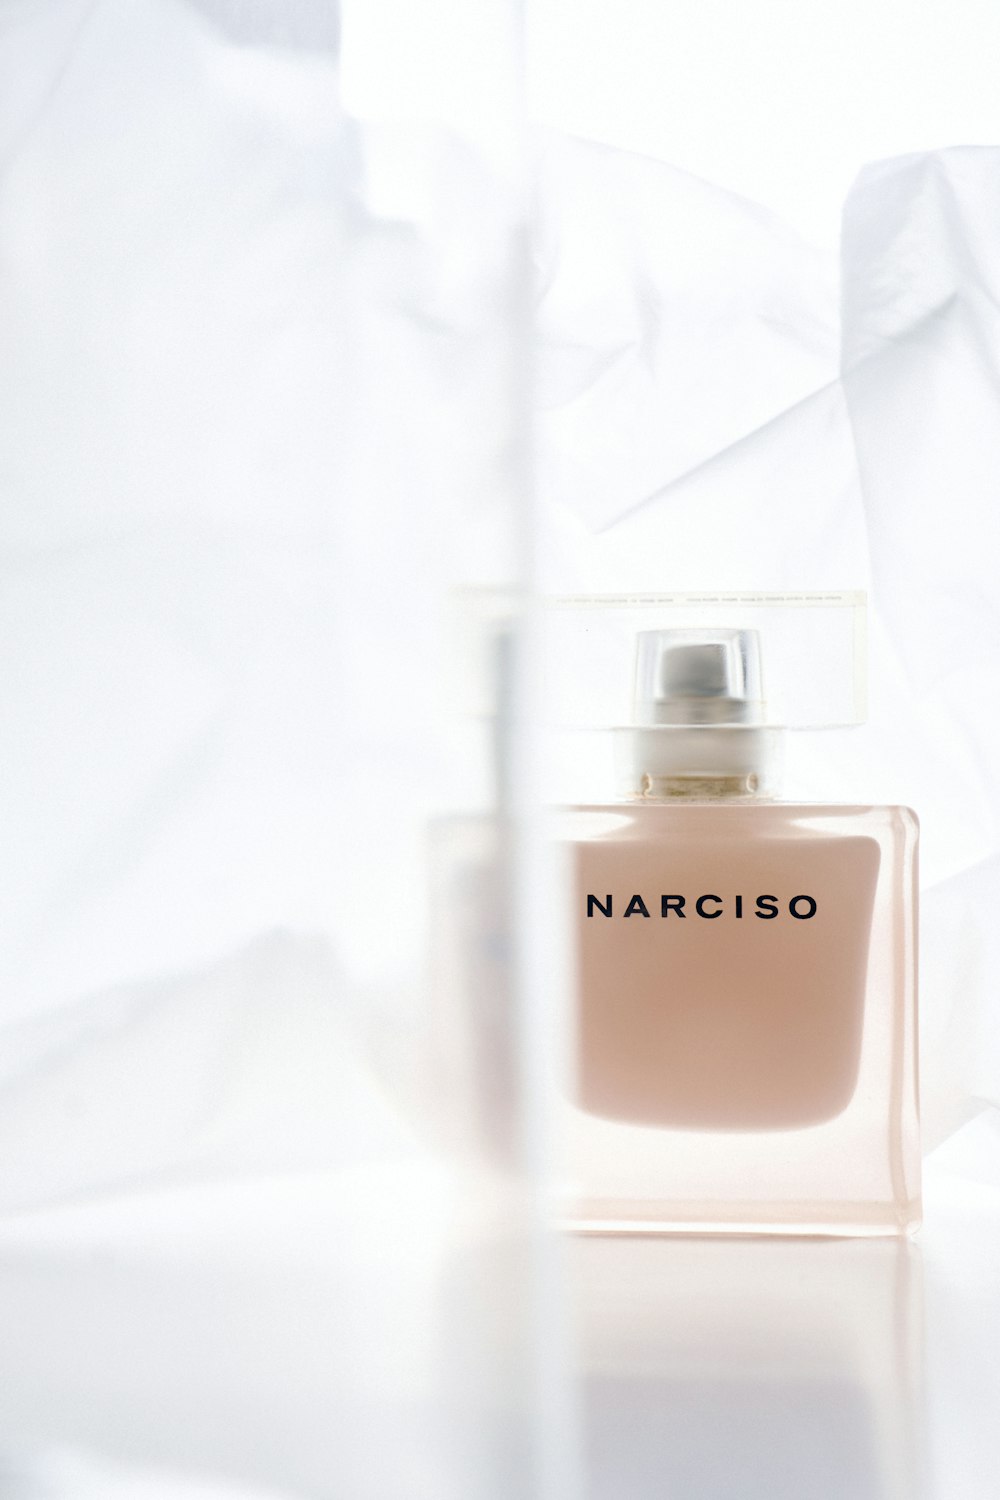 a bottle of narciso on a white surface